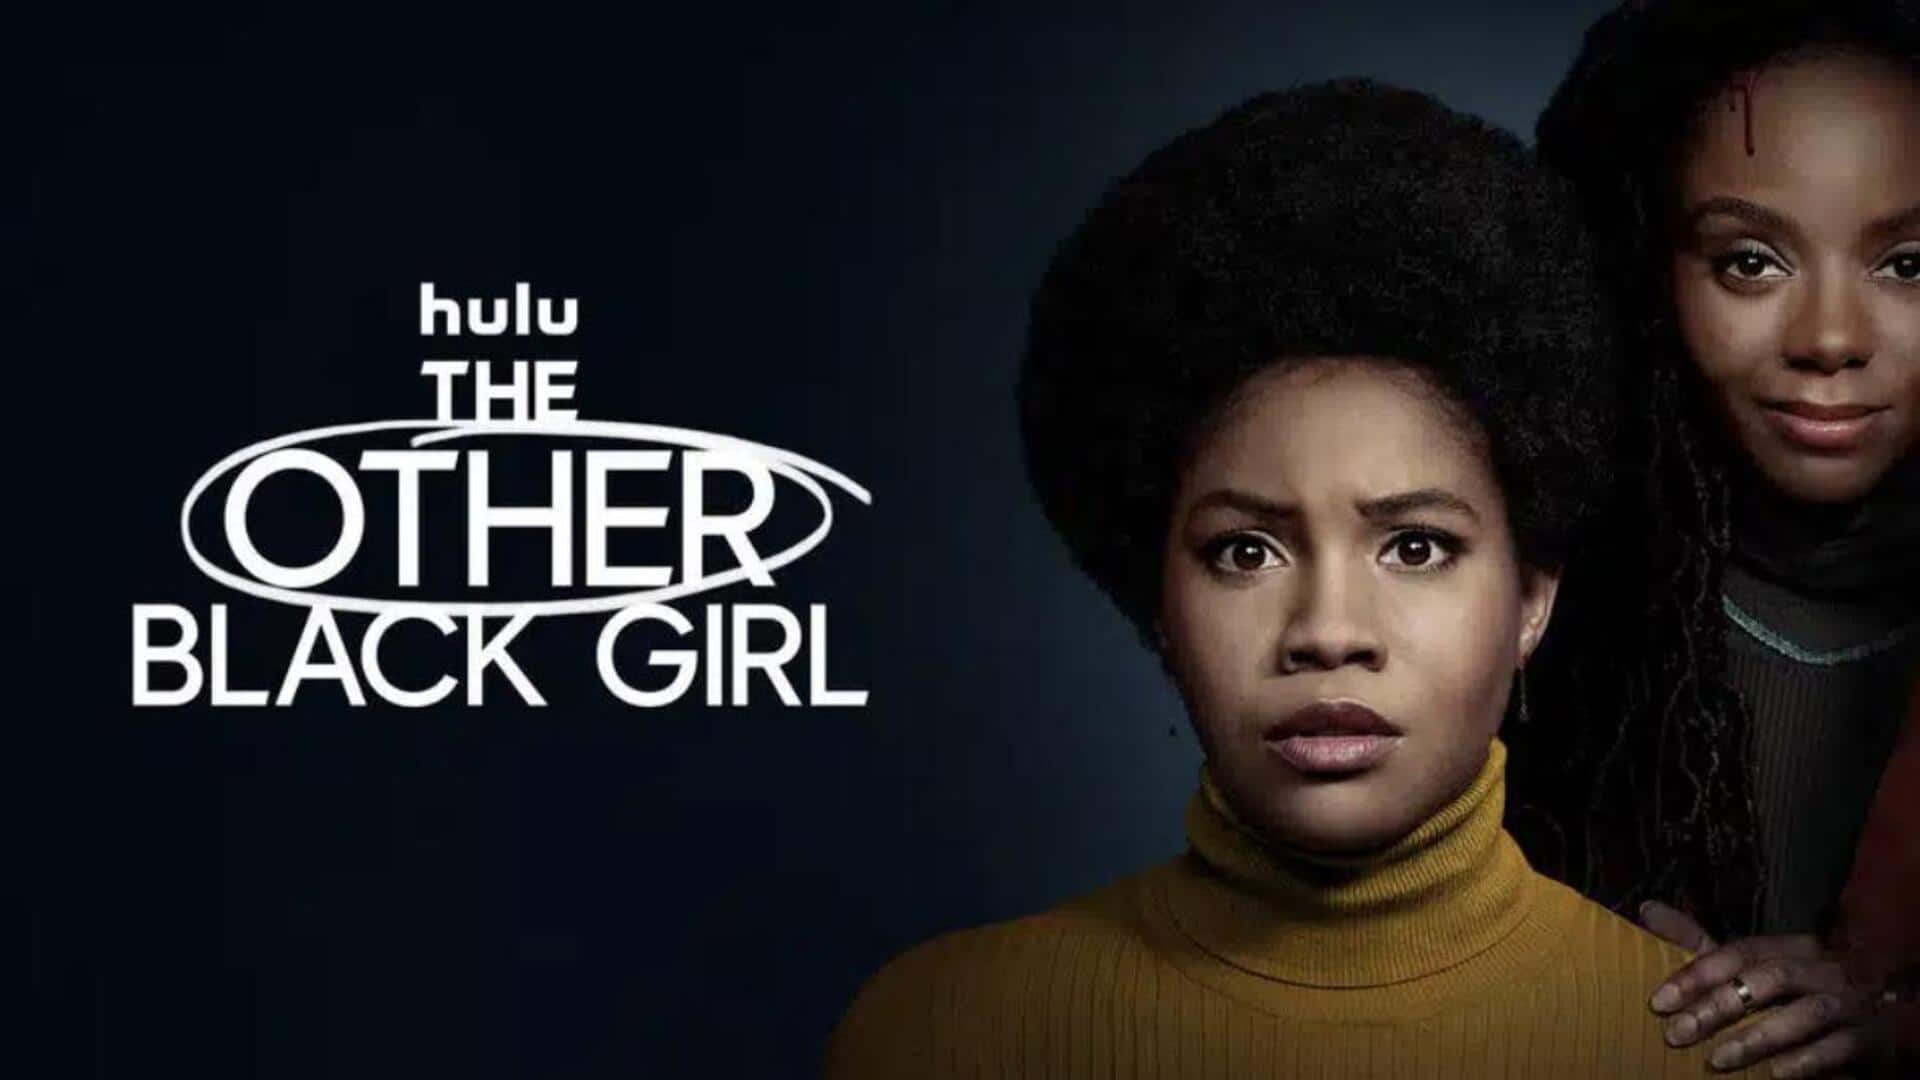 Hulu discontinues 'The Other Black Girl' after S1: Here's why